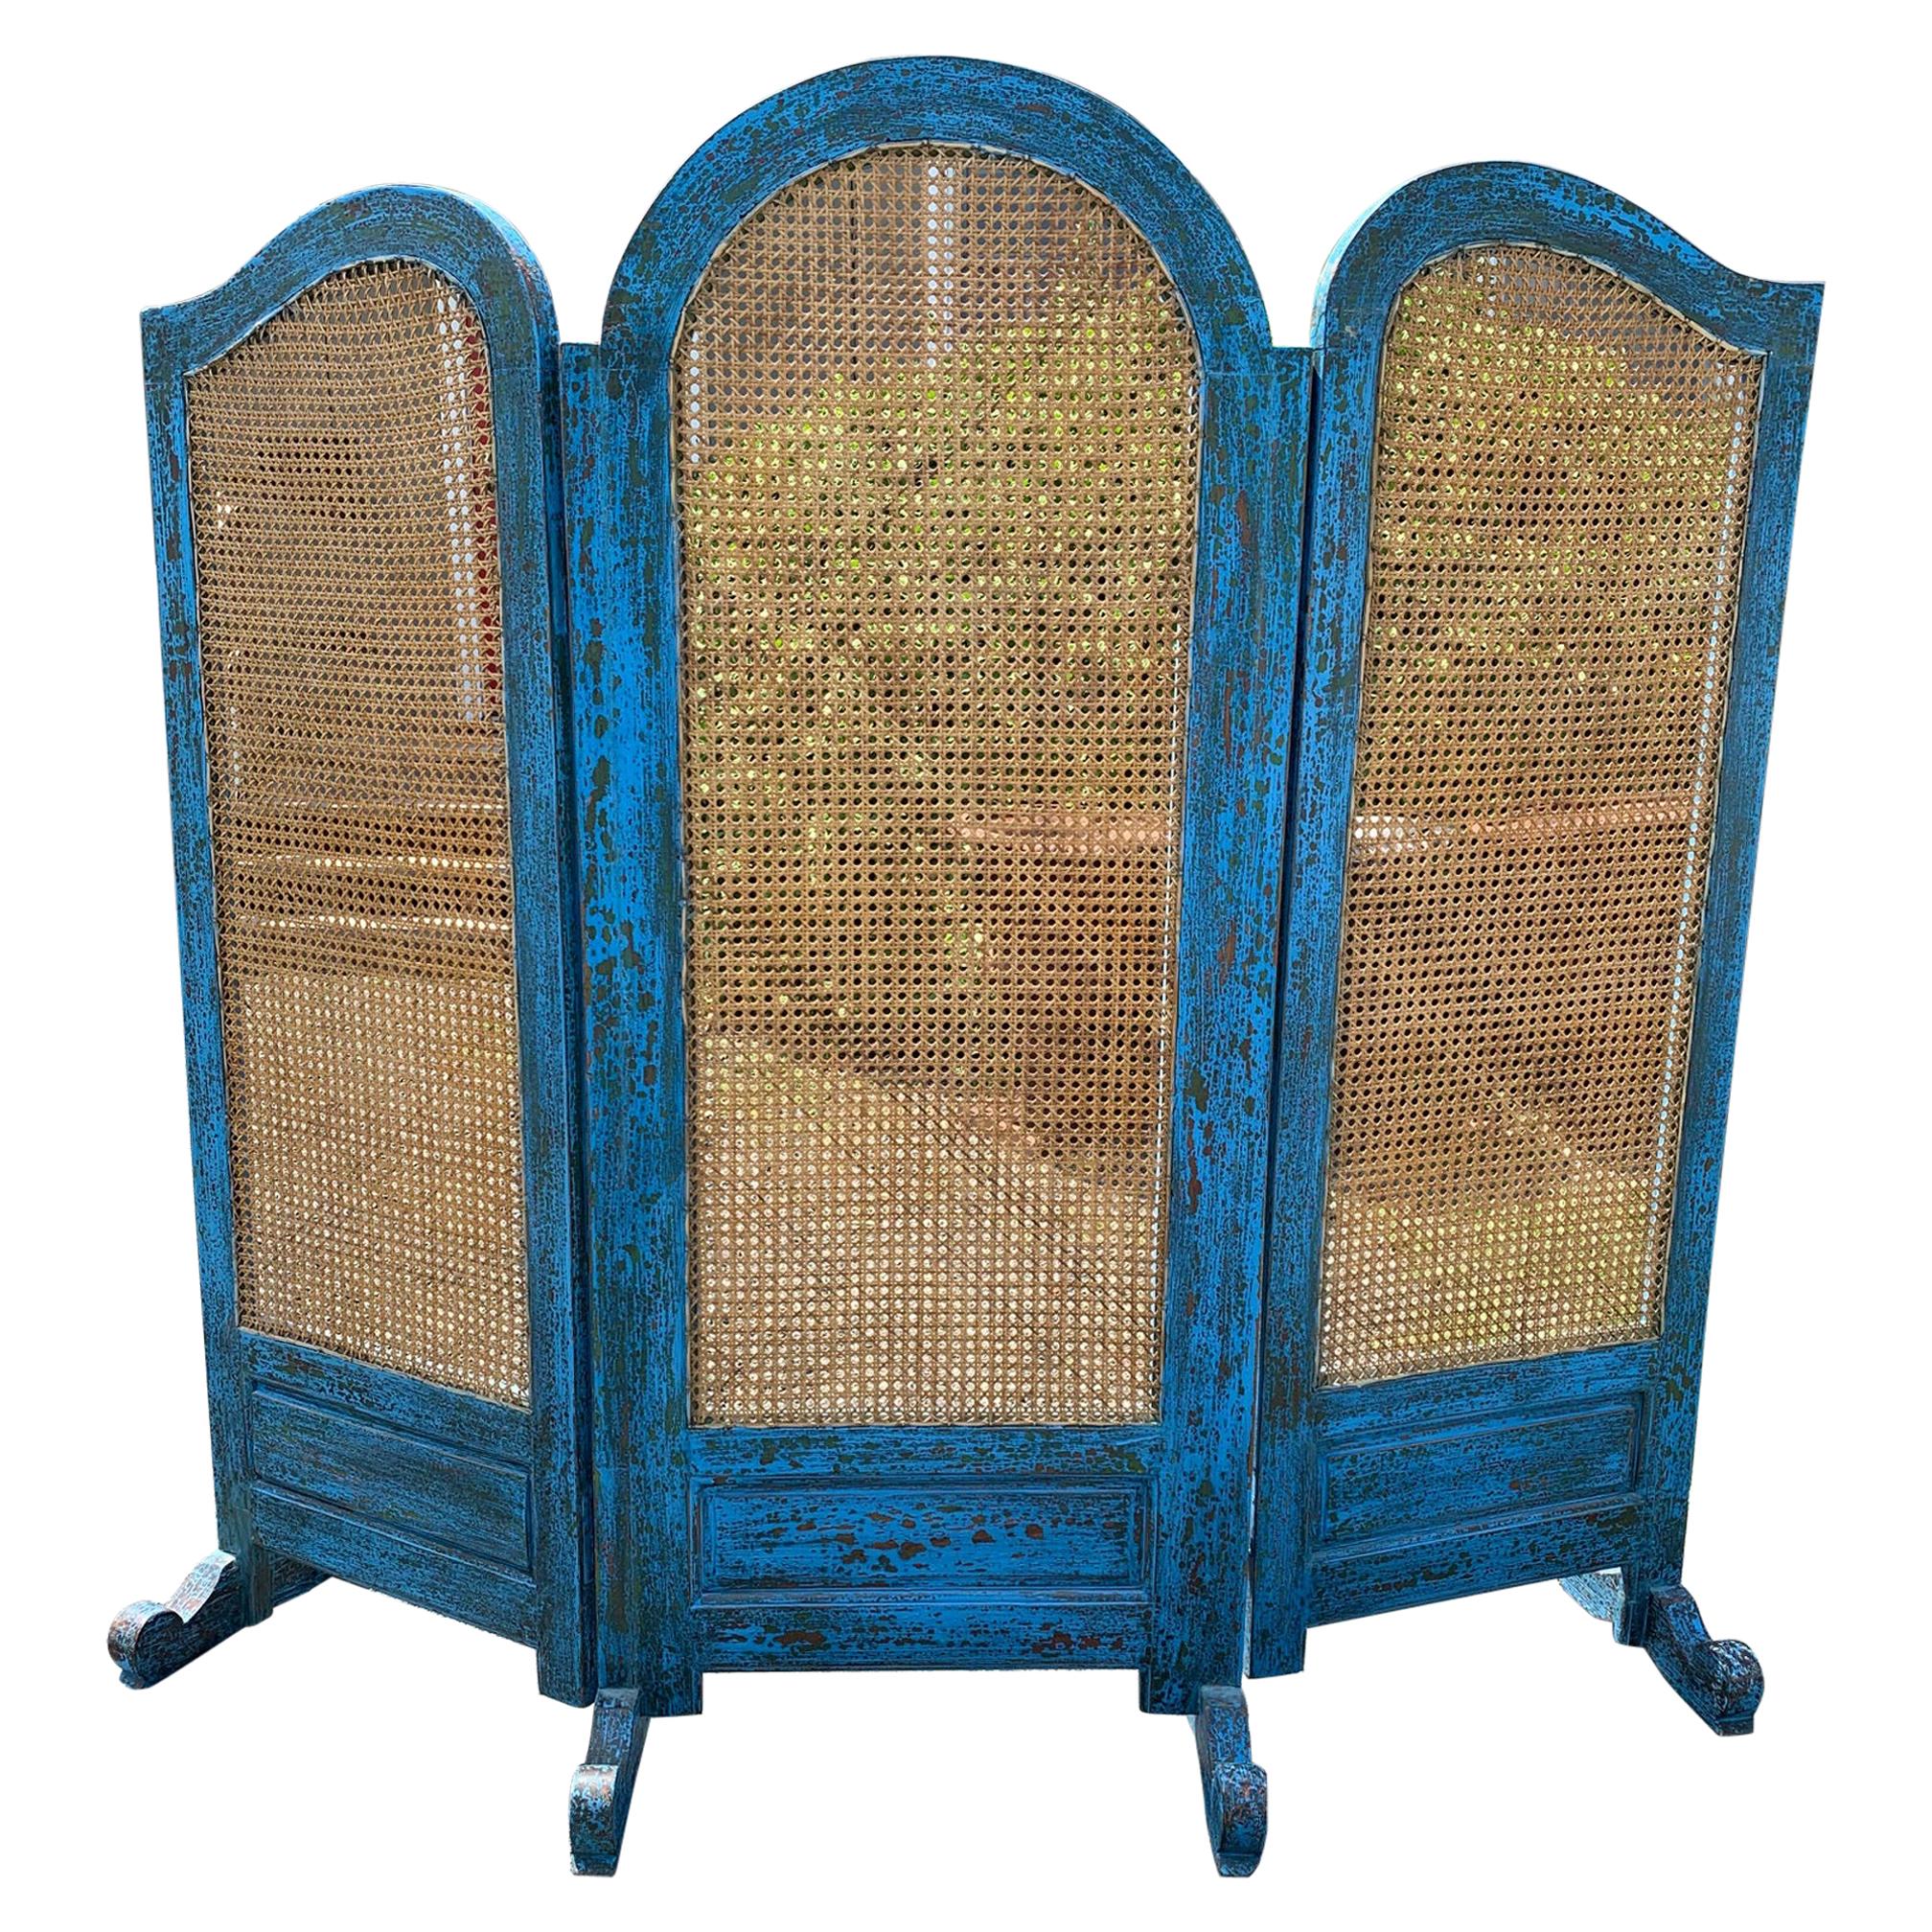 Sensational Turquoise Scrubbed Wood and Caned 3 Panel Screen